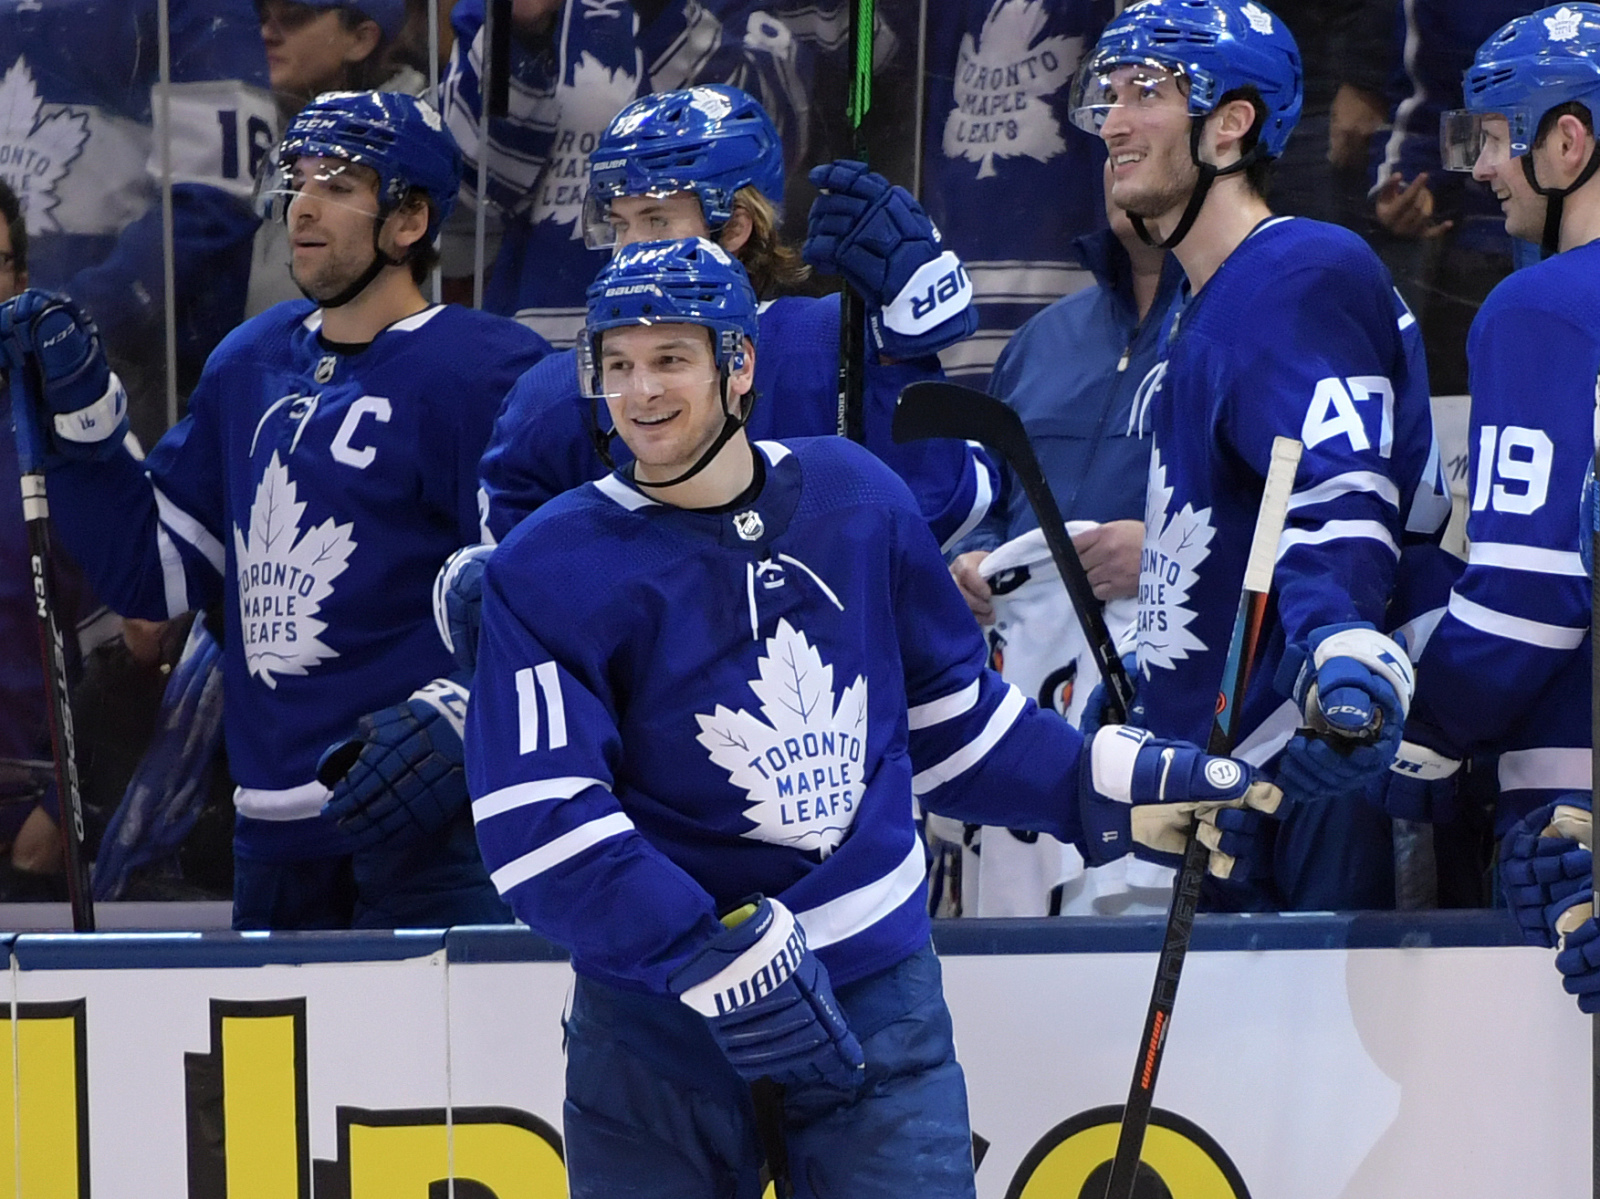 Q&A: Zach Hyman on what he'll miss most about Toronto's Jewish